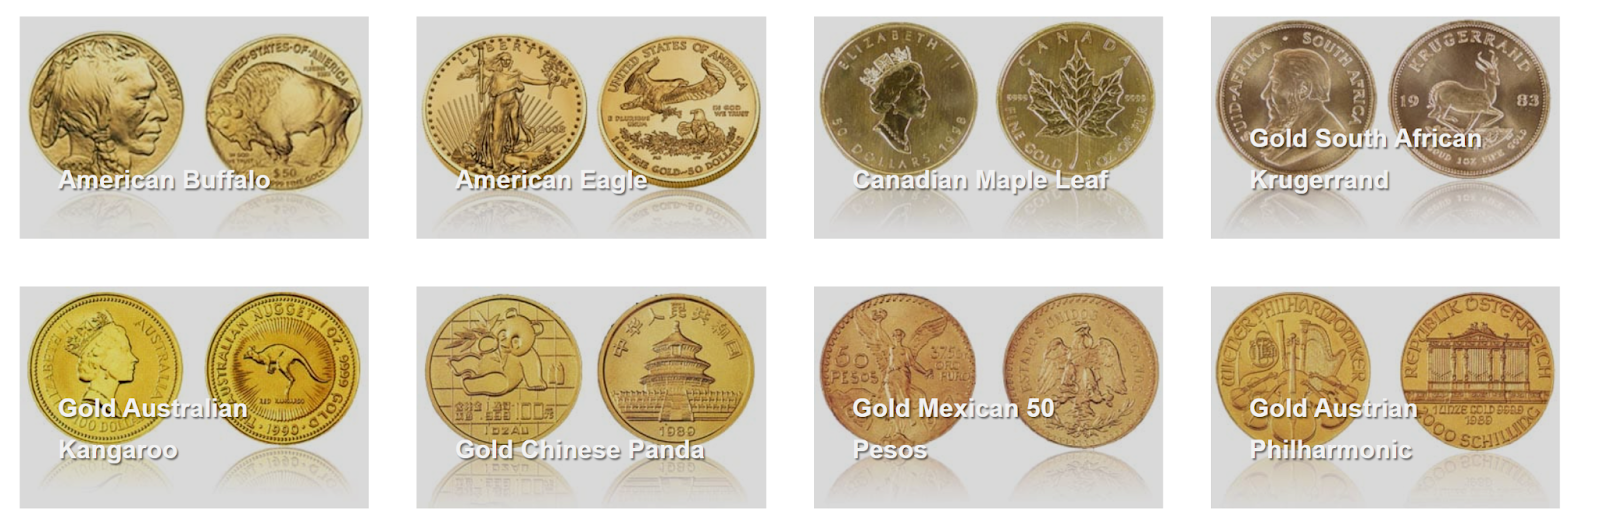 dallas gold and silver gold coins